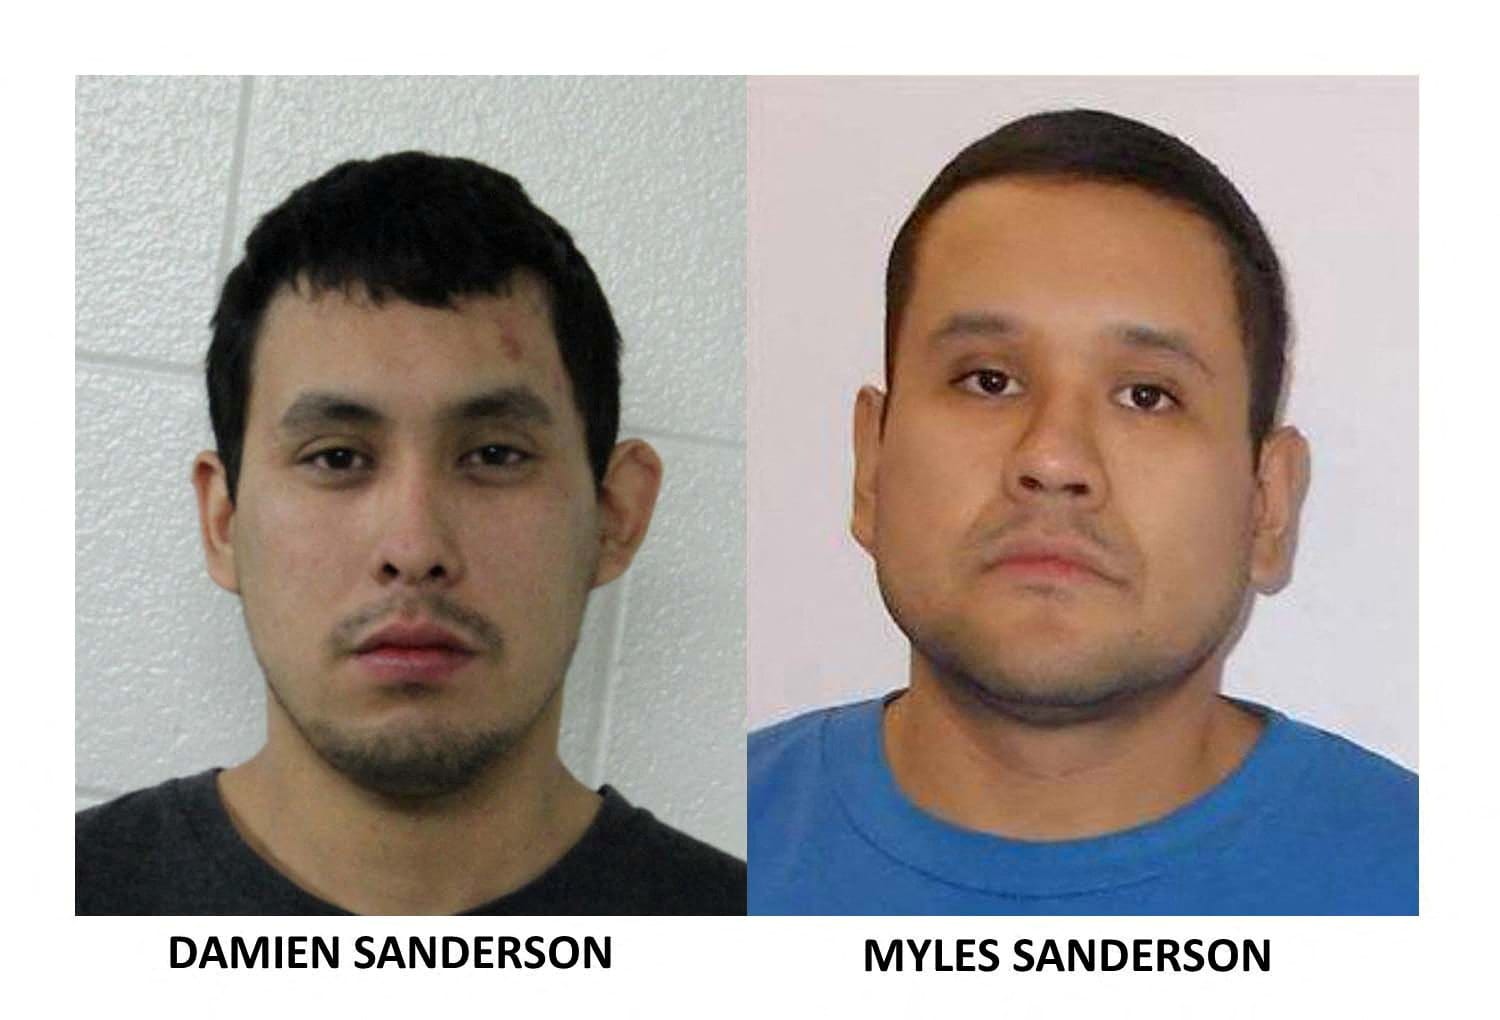 Damien Sanderson and Myles Sanderson, who are named by the Royal Canadian Mounted Police (RCMP) as suspects in stabbings in Canada's Saskatchewan province, are pictured in this undated handout image released by the RCMP Sept 4, 2022.